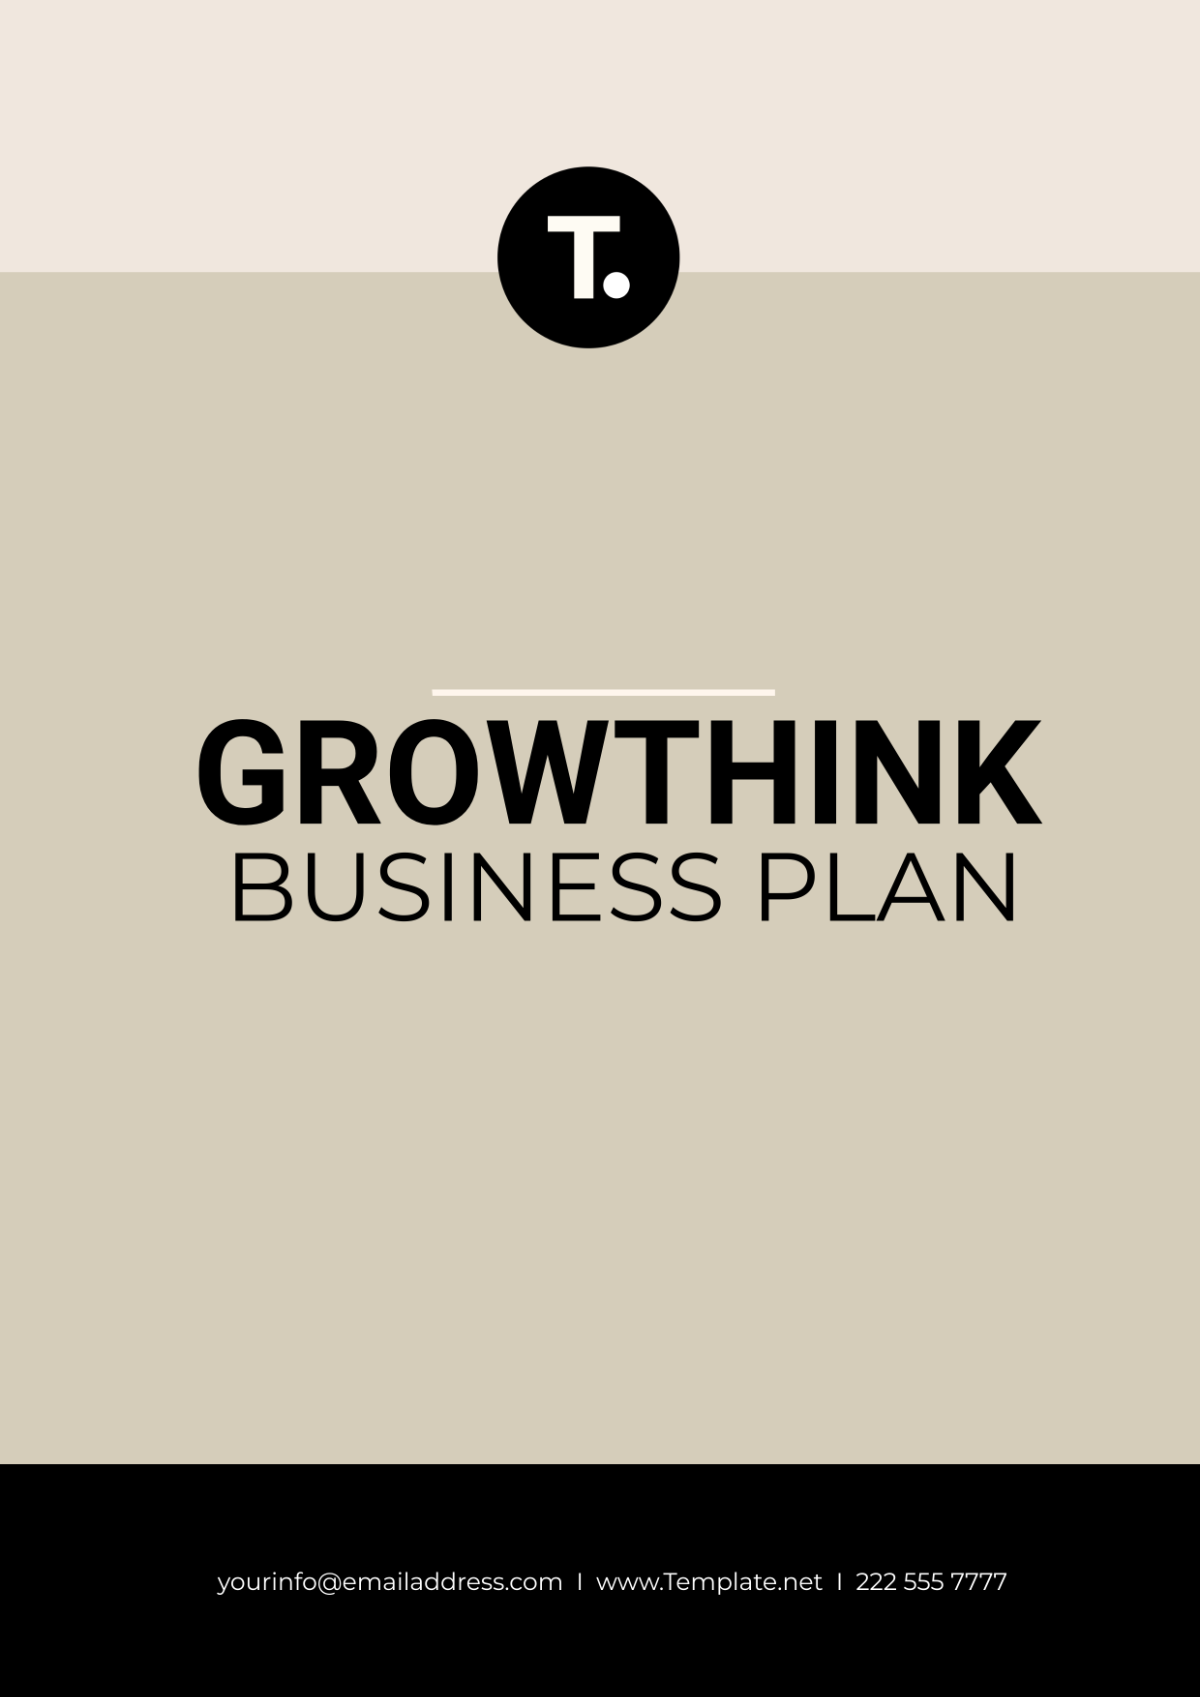 Growthink Business Plan Template